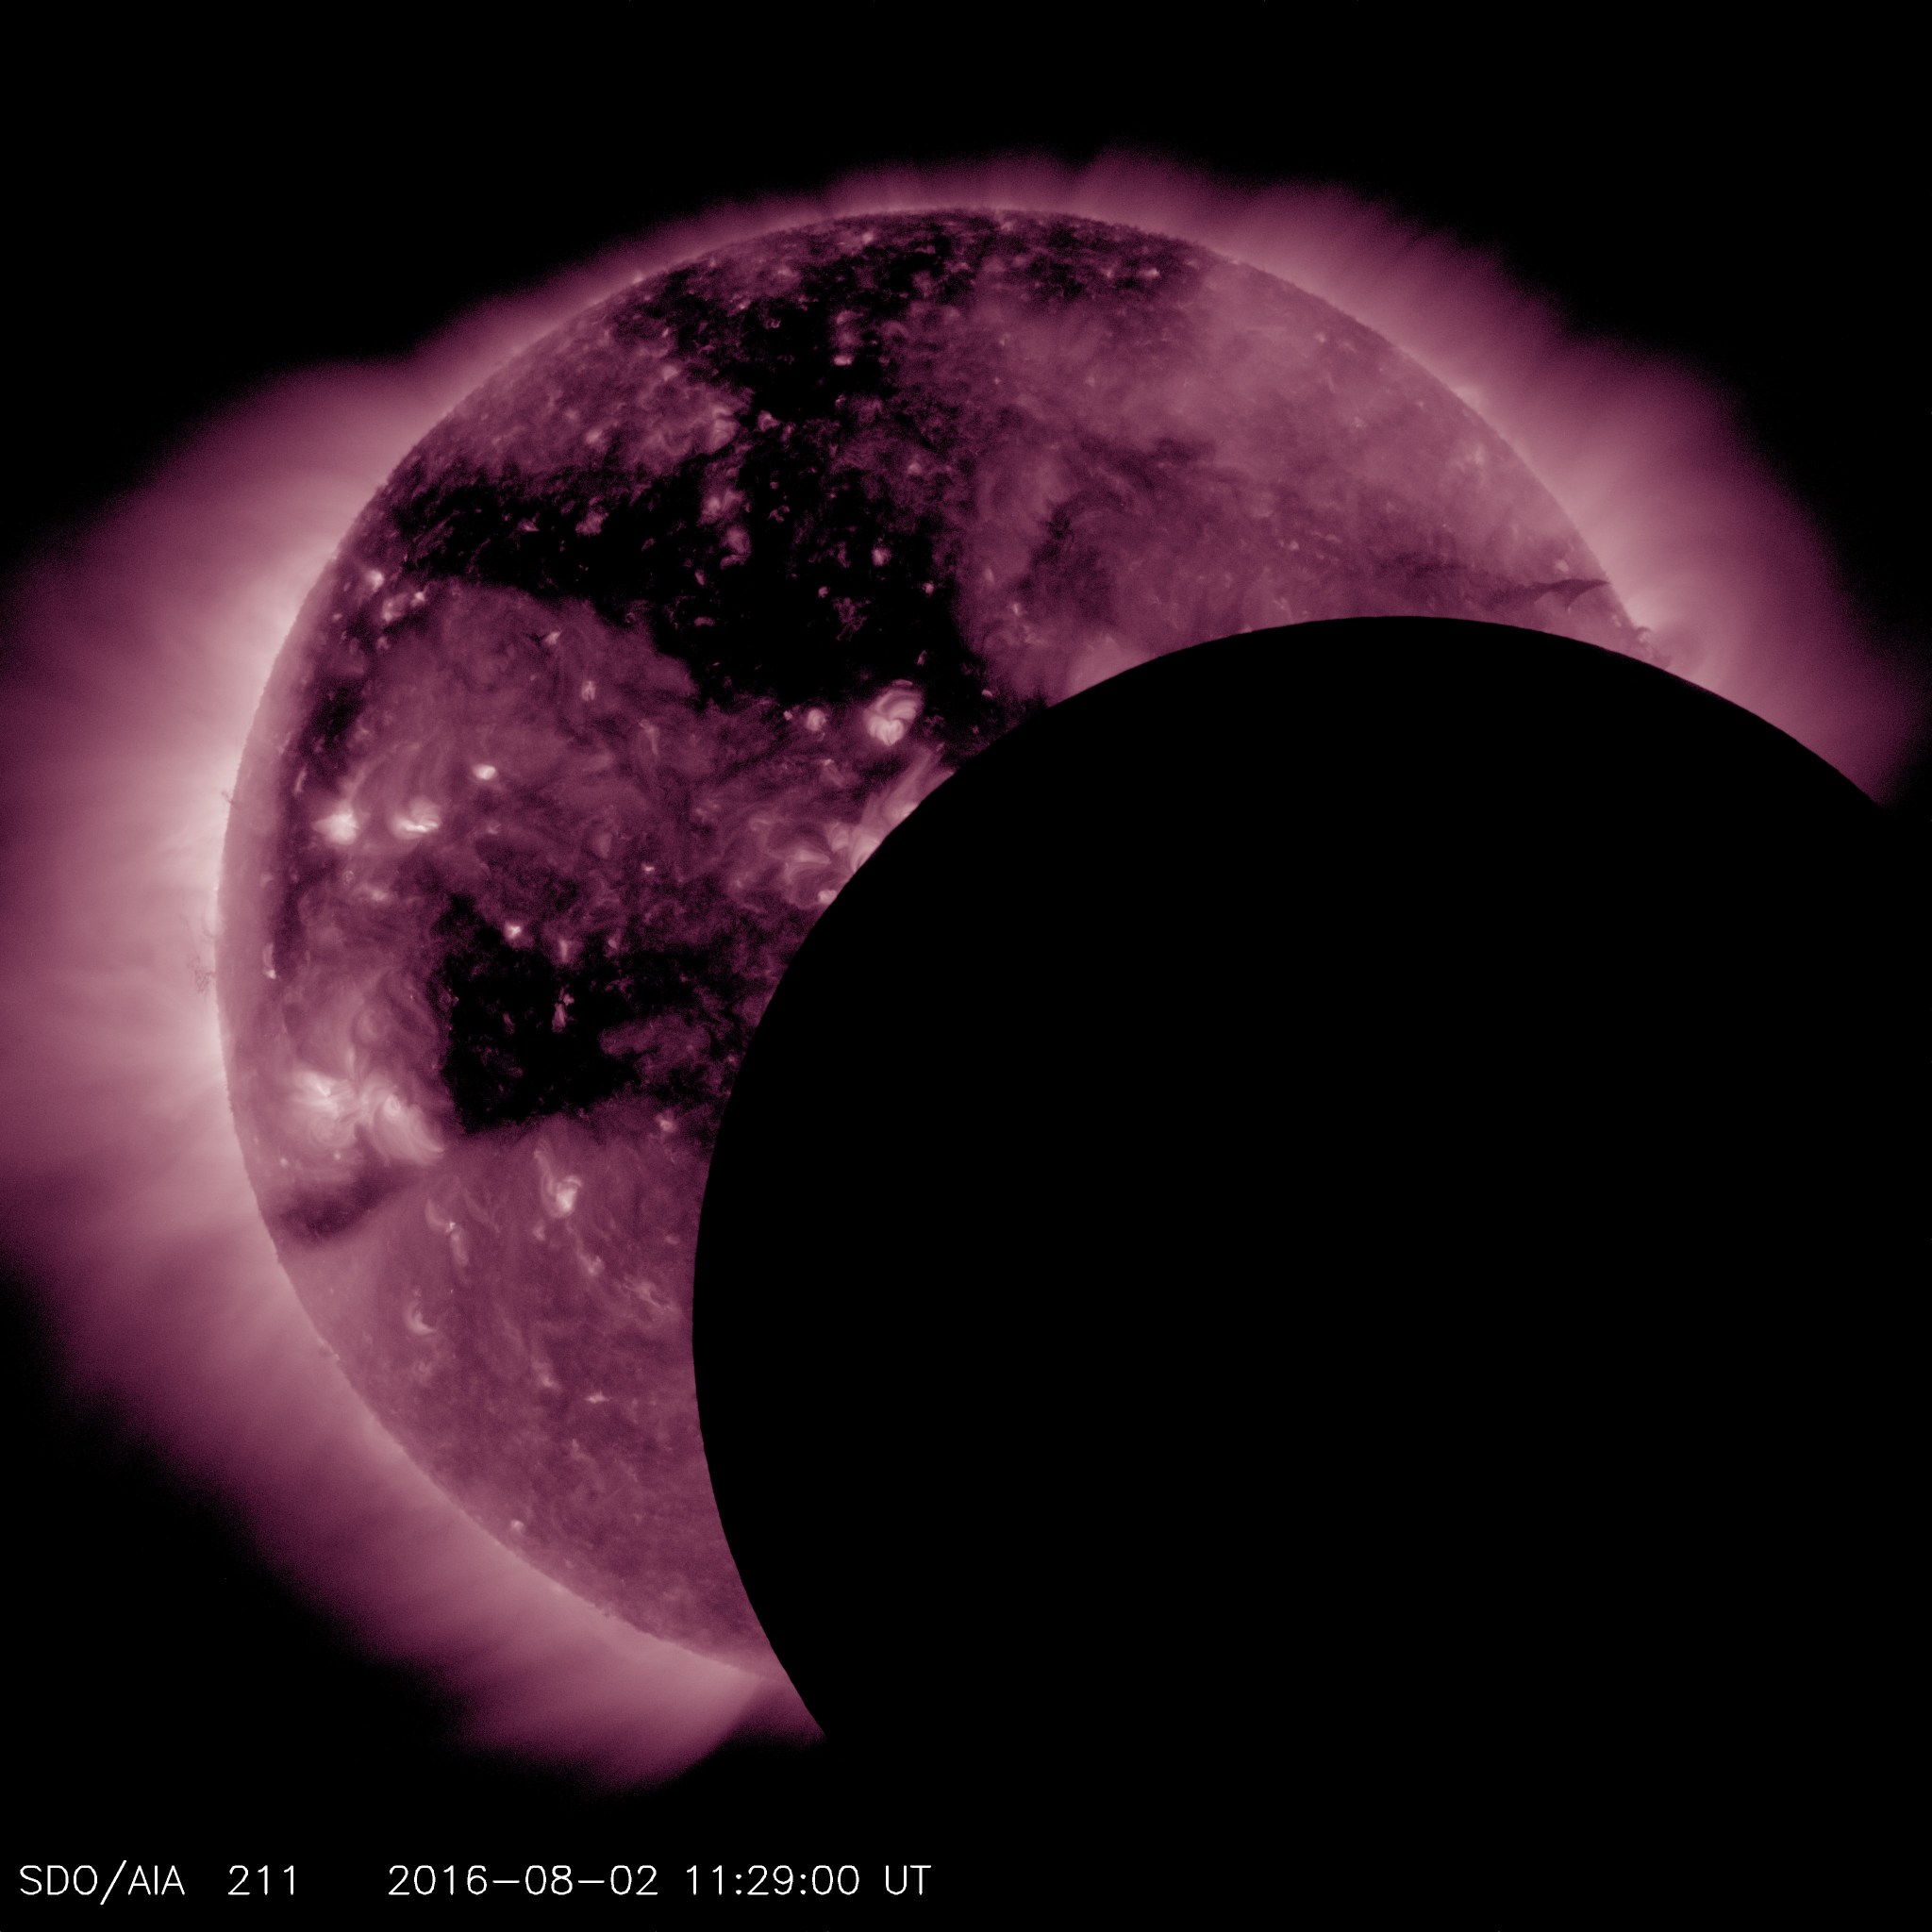 SDO view of moon passing across the face of the sun